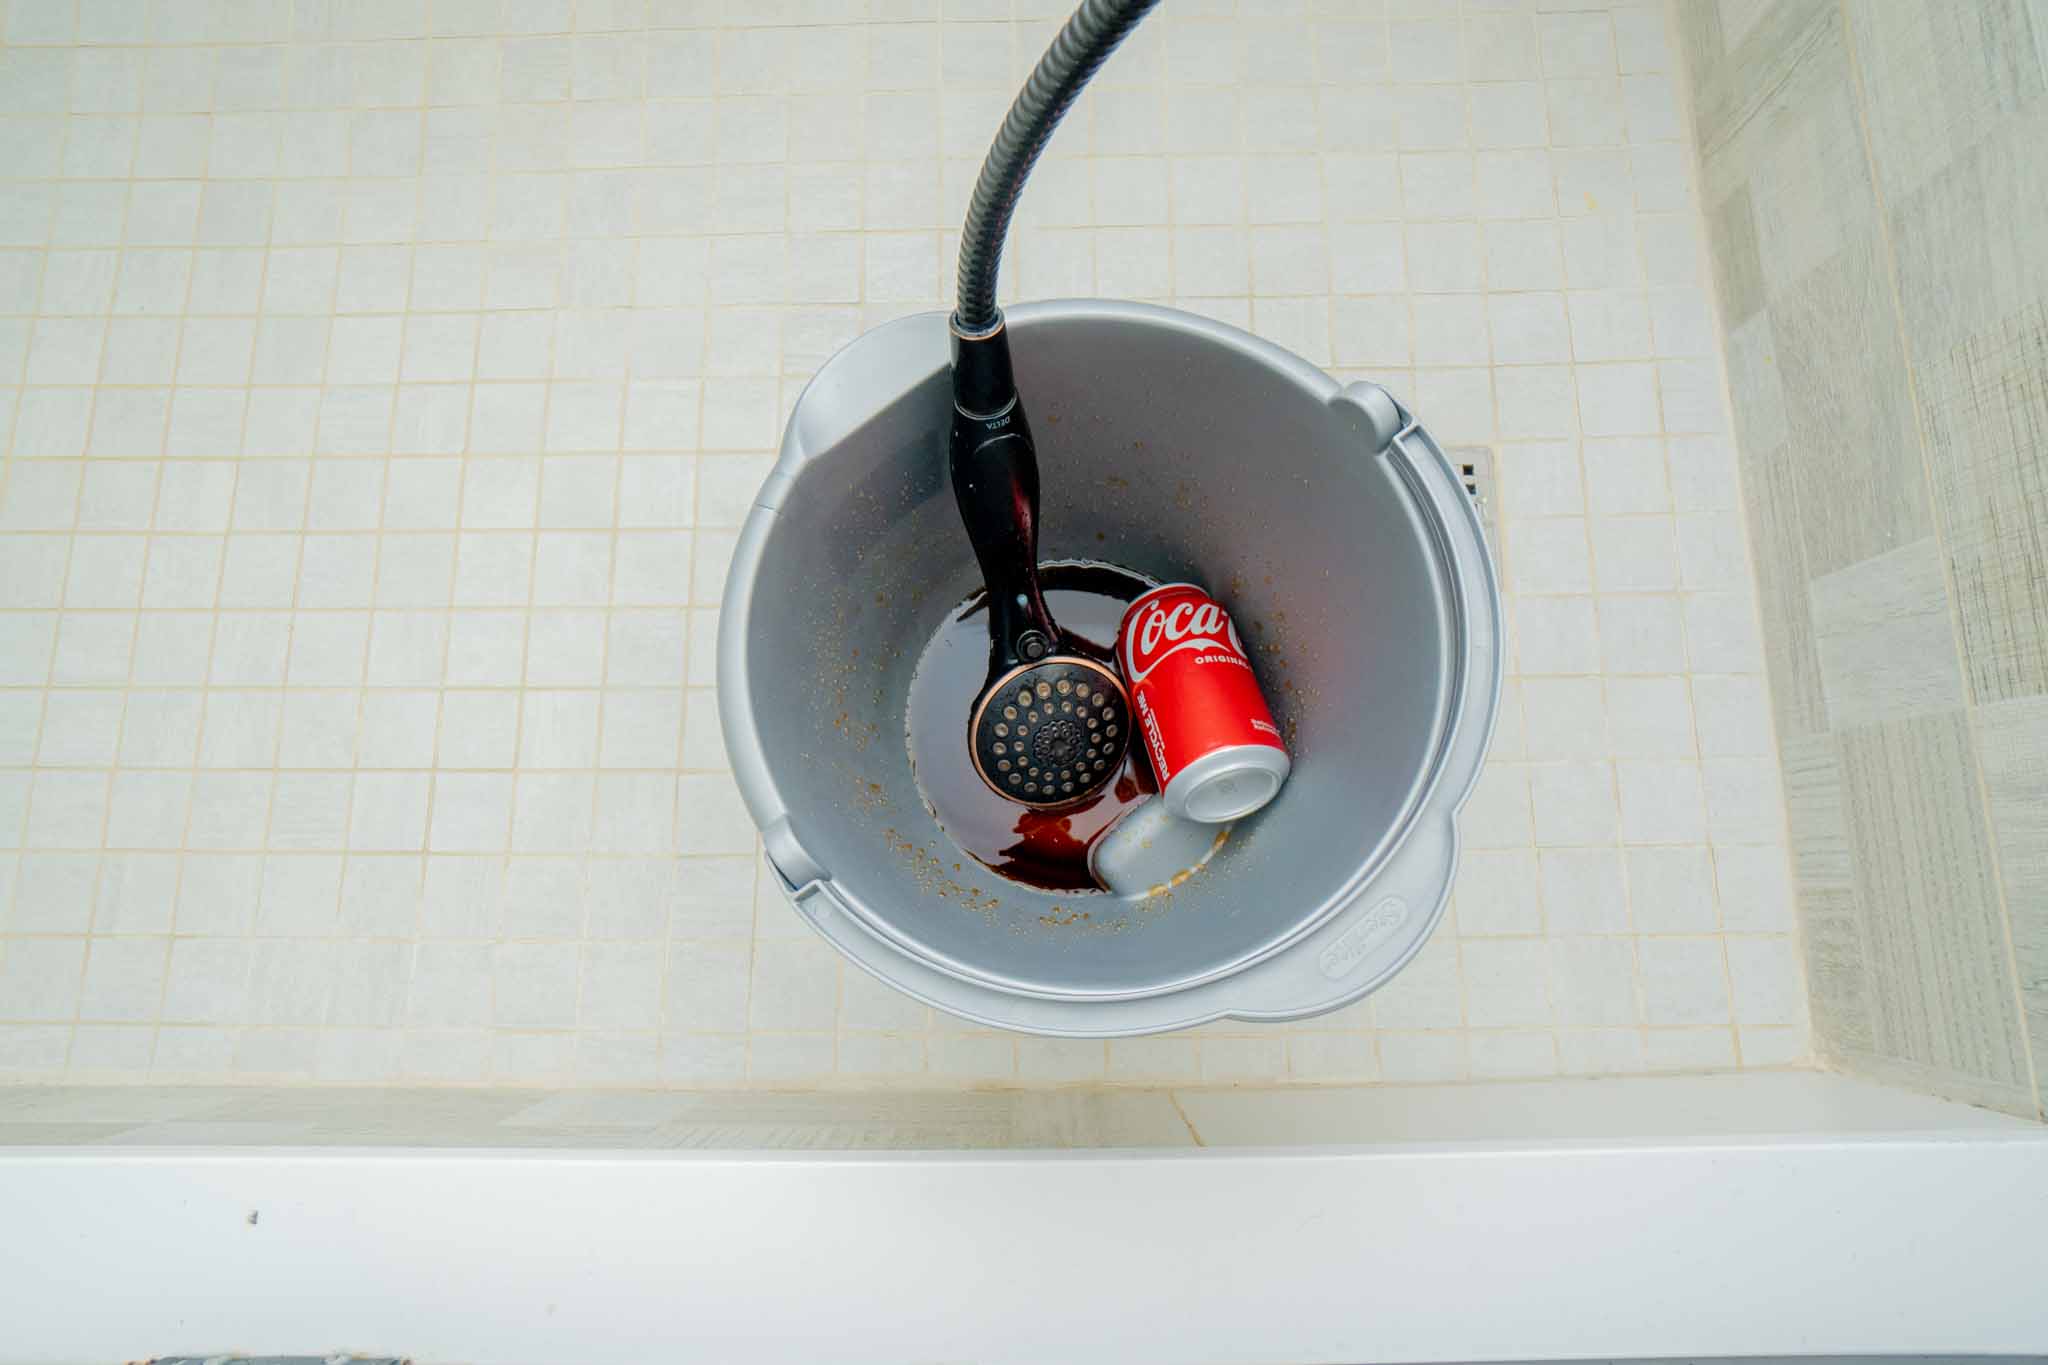 Pouring coco cola on shower head